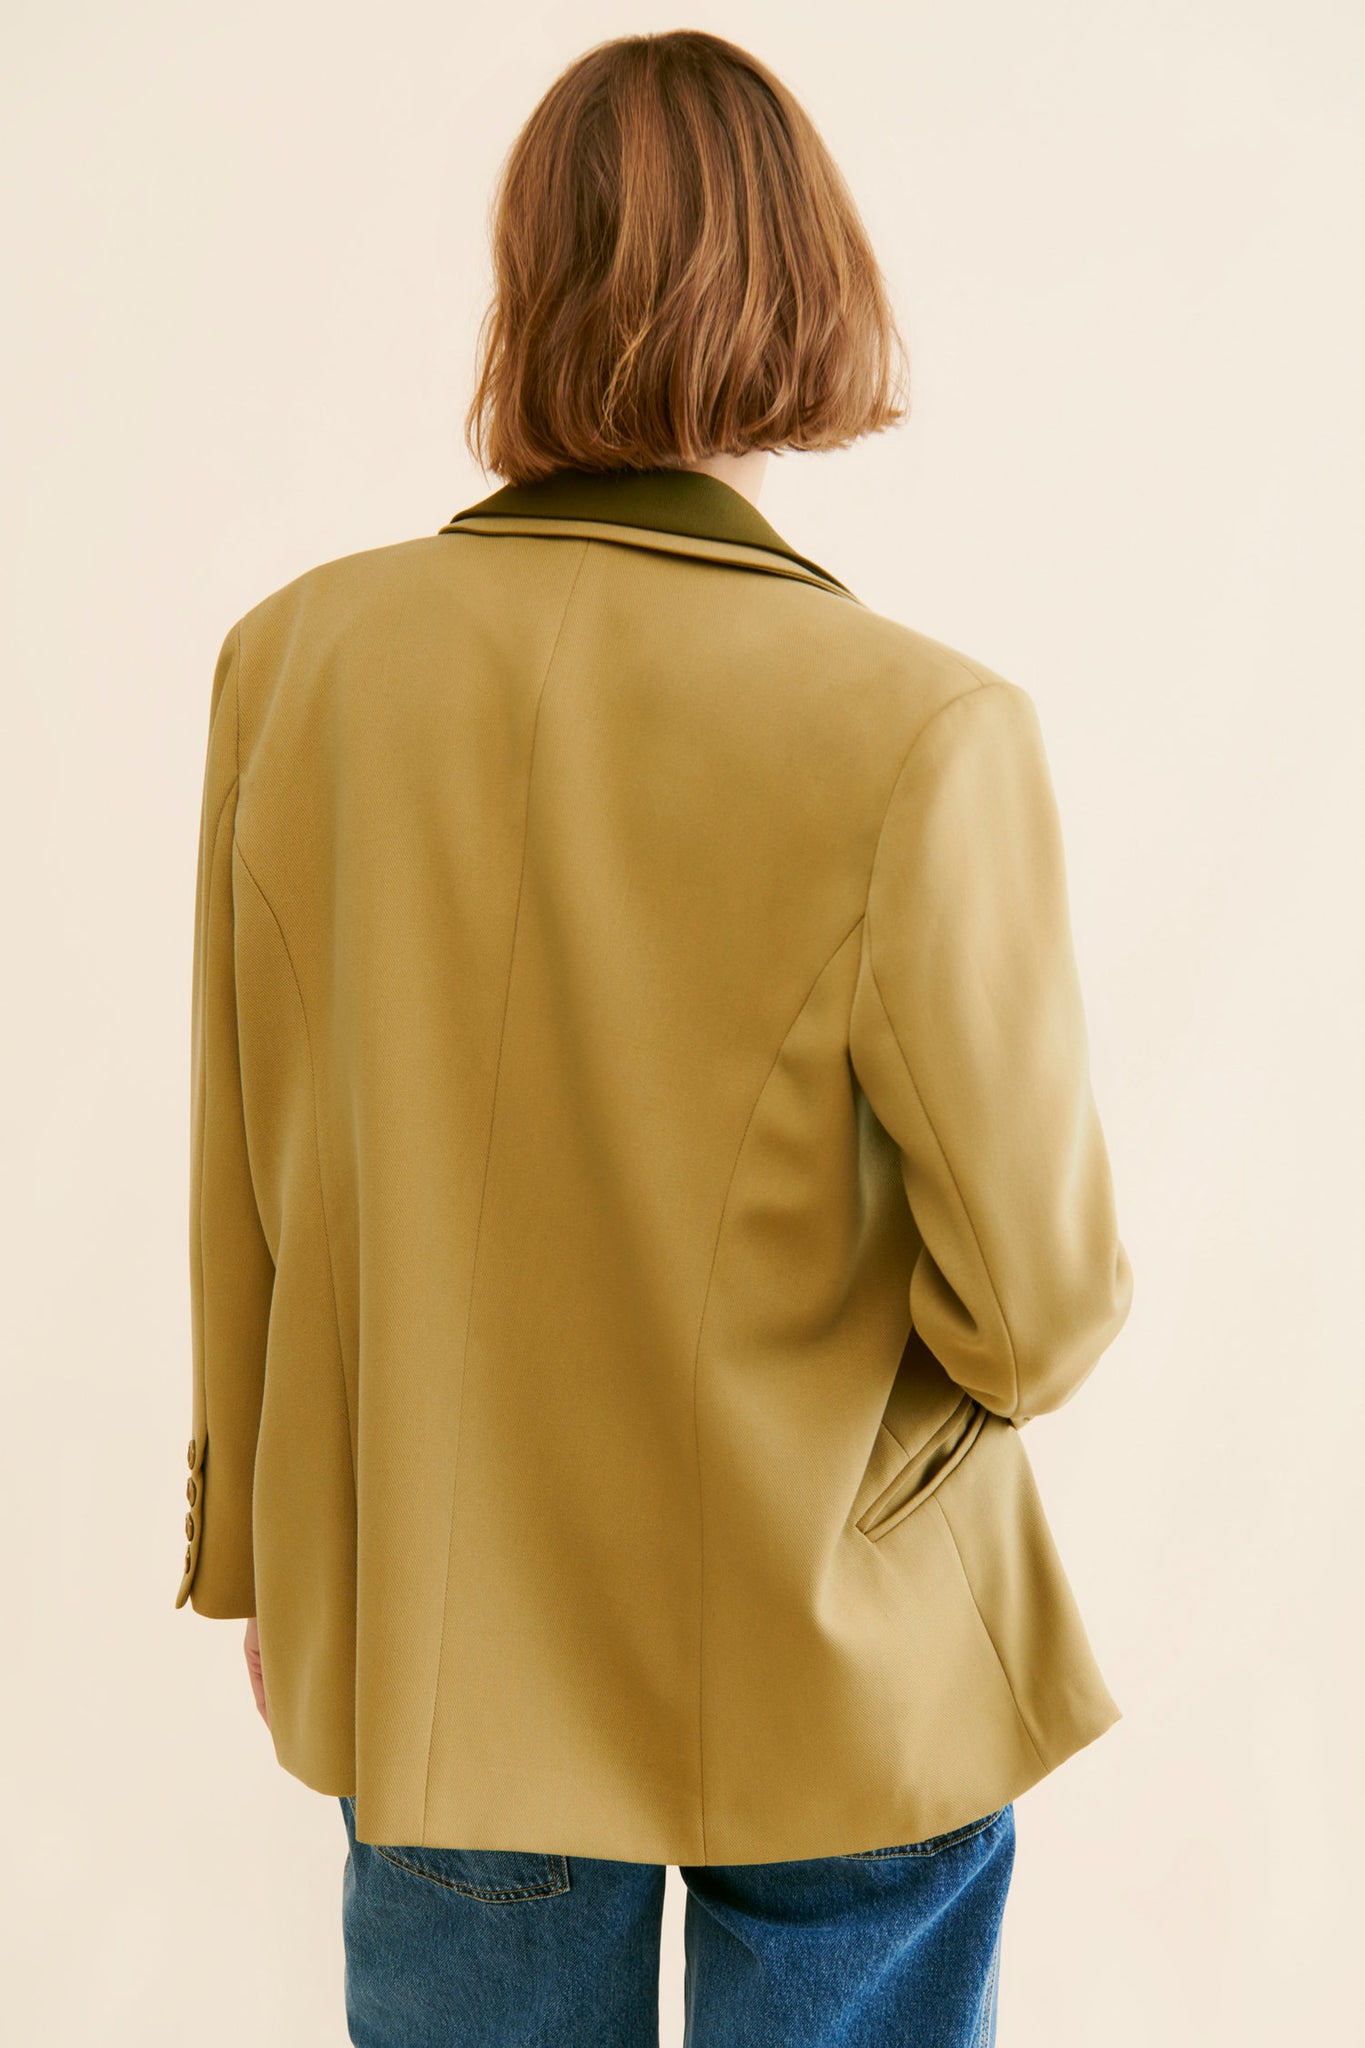 ISAAC LAYERED BLAZER, TAN COLOR, OLIVE COLOR, FULLY LINED, FRONT FLAP POCKETS, OVERSIZED BLAZER, DOUBLE COLLARS